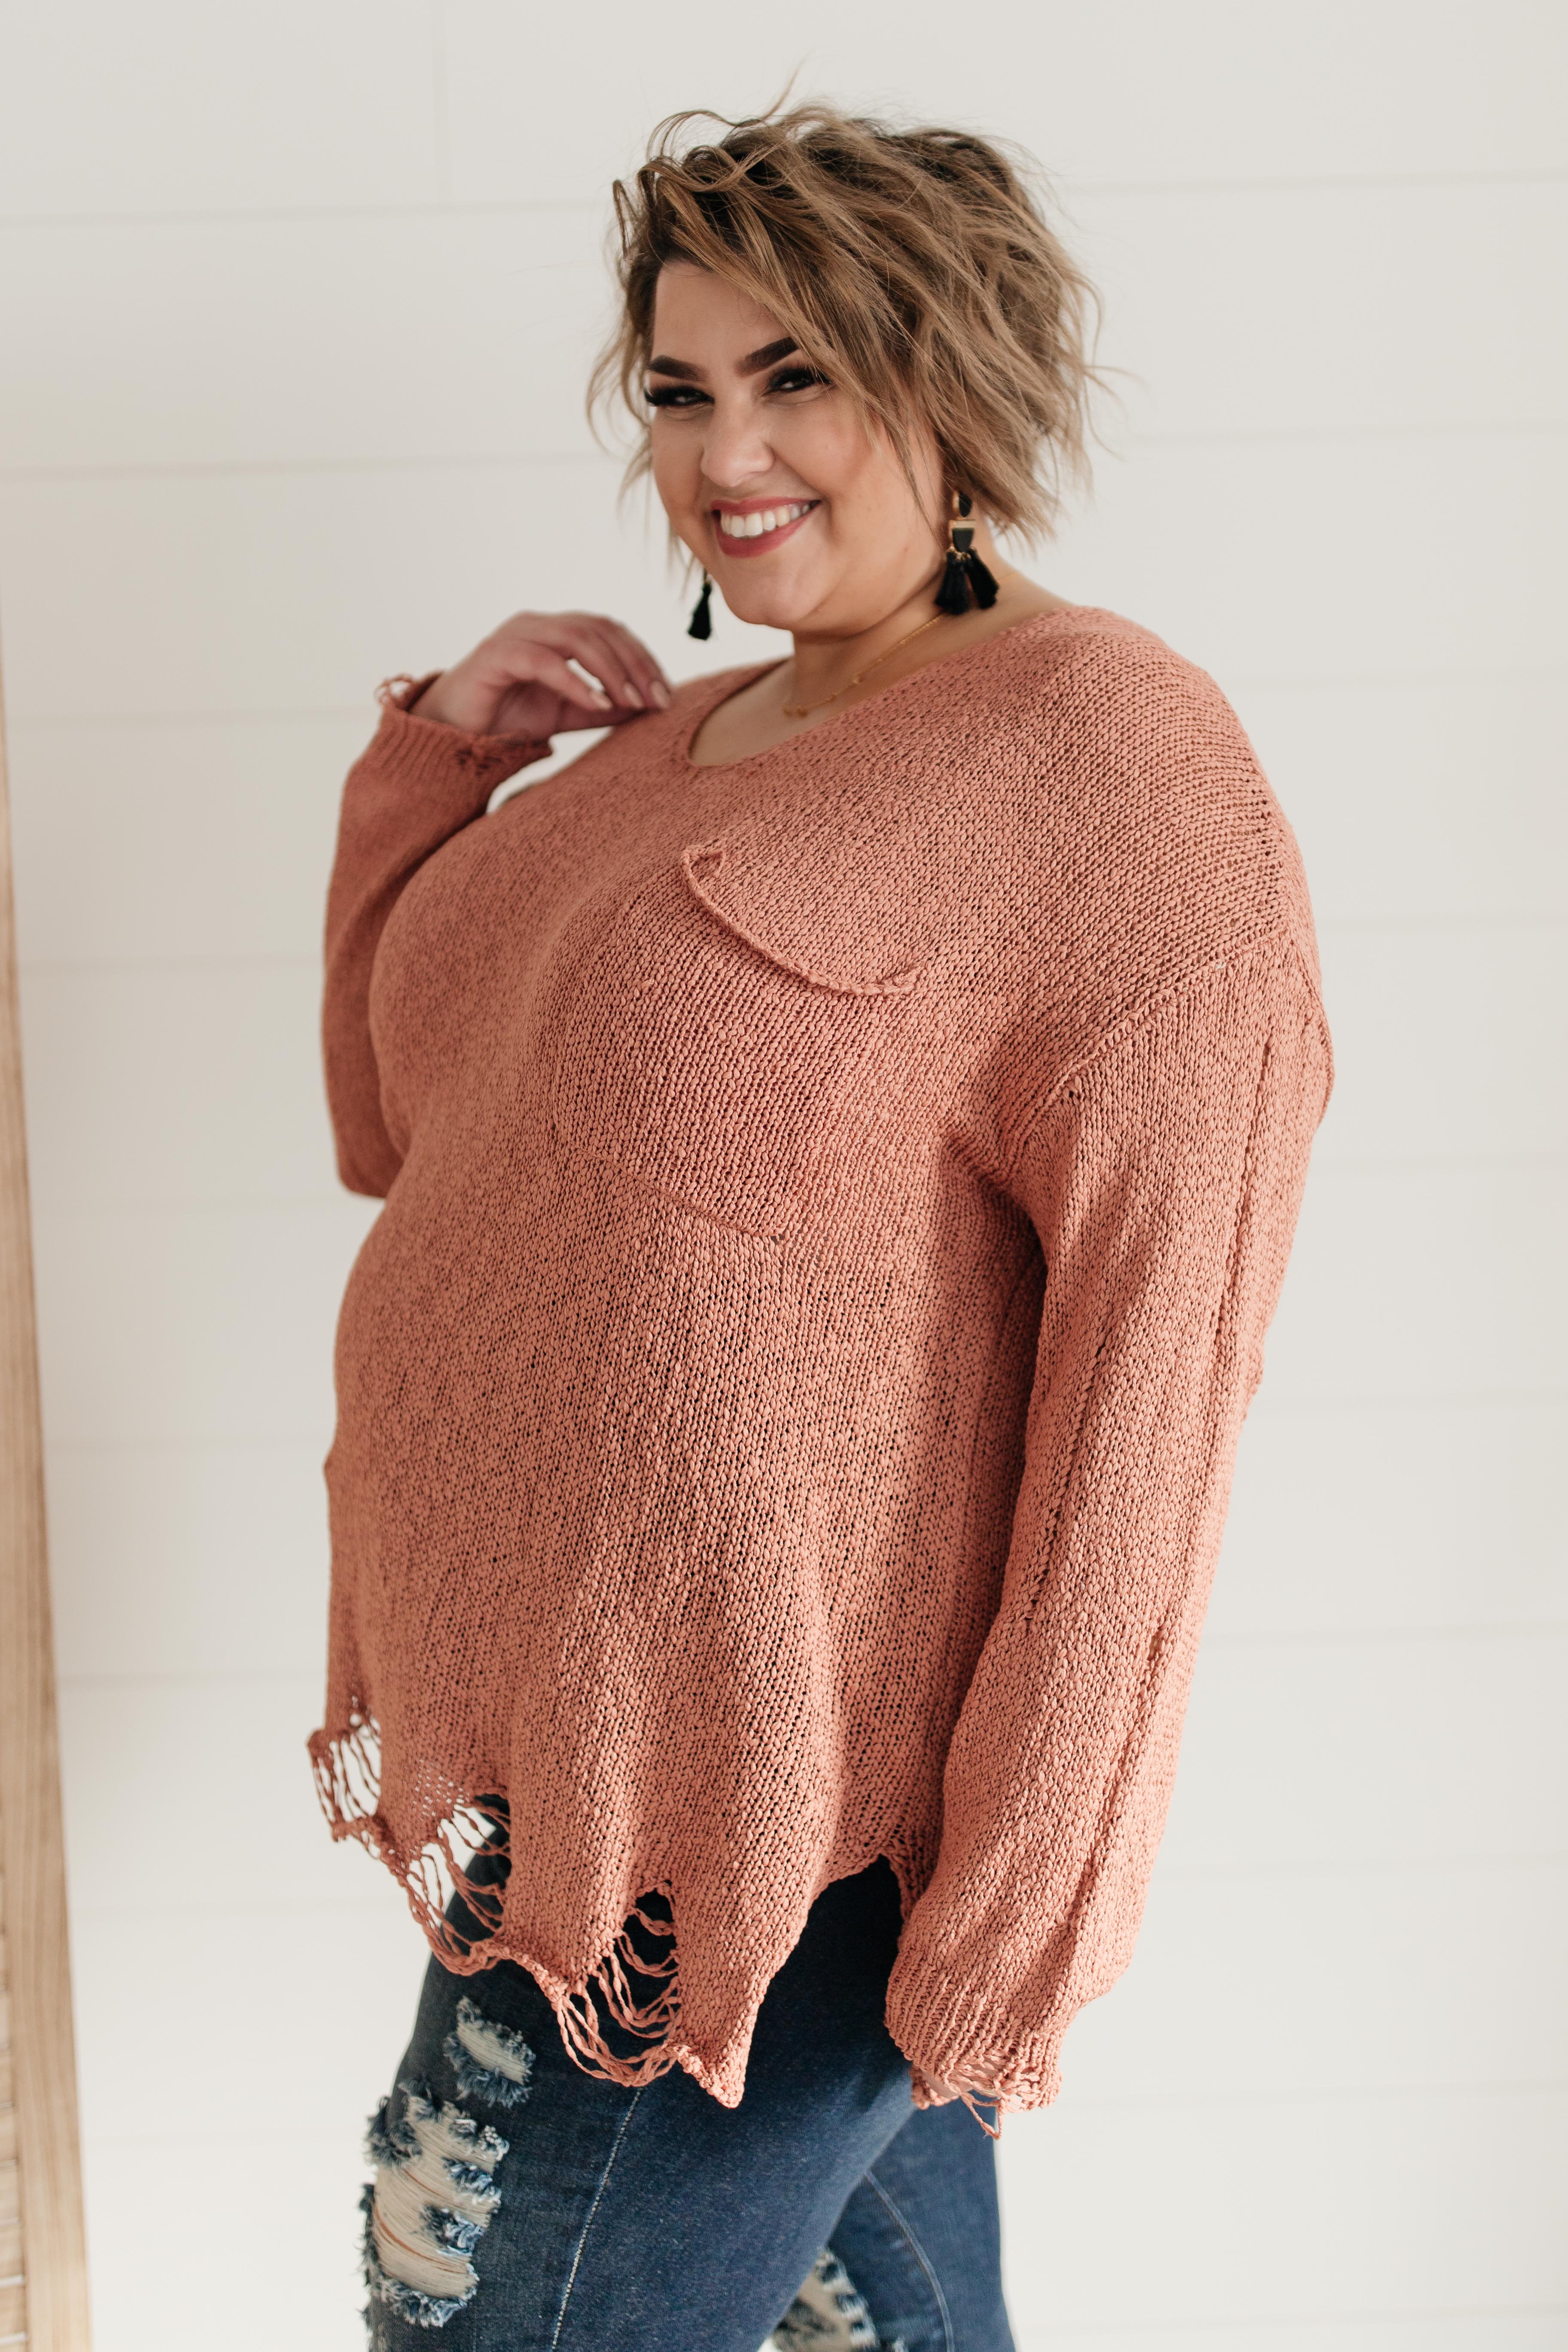 Distressed and Proud Sweater in Ginger